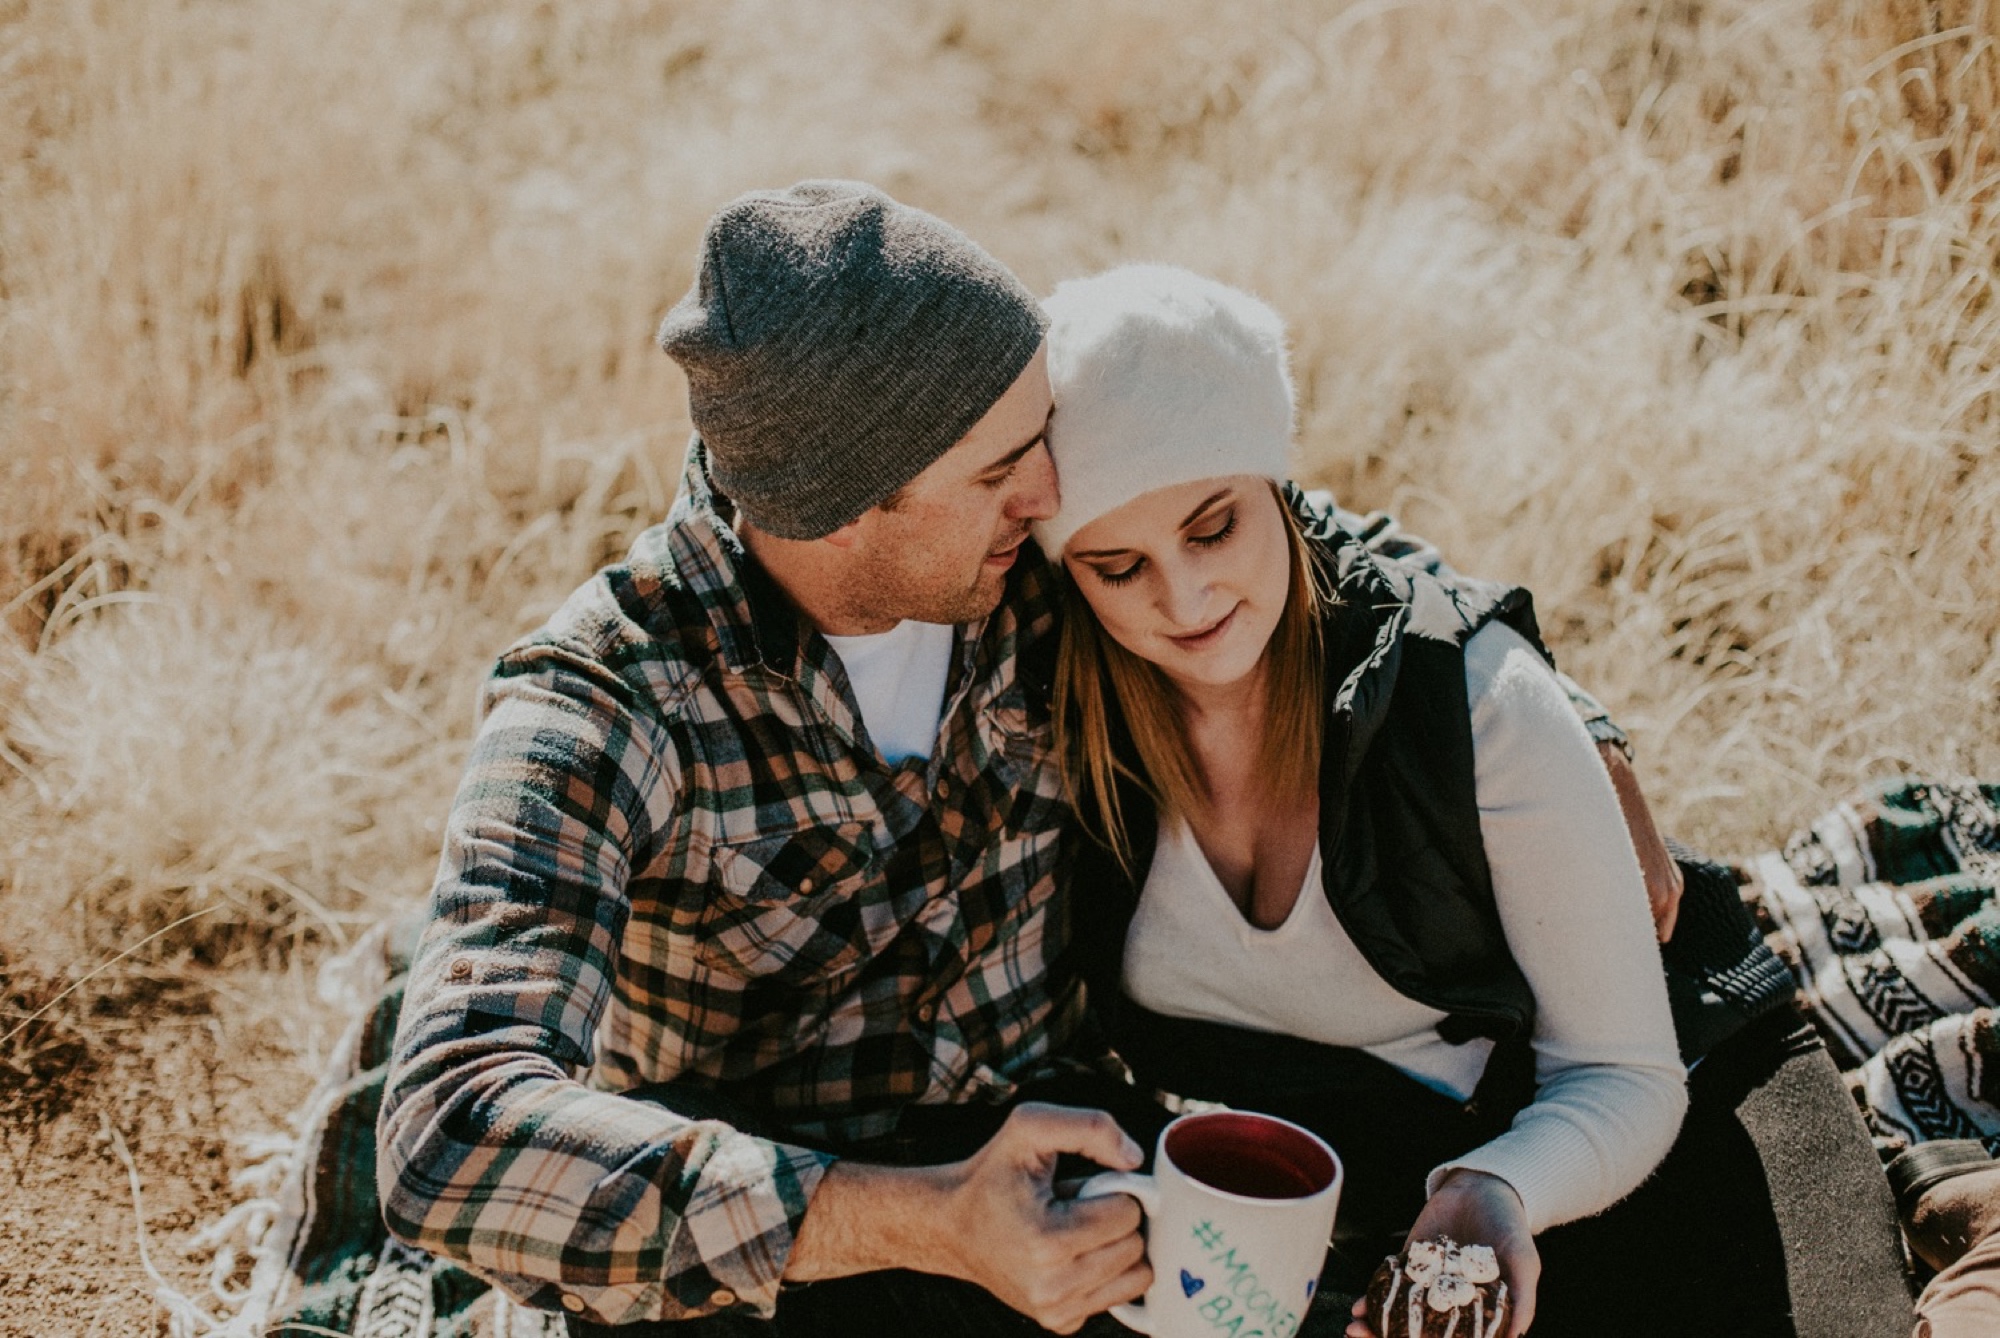  We took a drive to the Sandia Rockhouse to capture Chris and Kymbrye’s beautiful engagement photos in Albuquerque, New Mexico. Chris and Kymbrye brought some serious cuteness for their epic engagement session! I love the rustic, cozy theme they chos